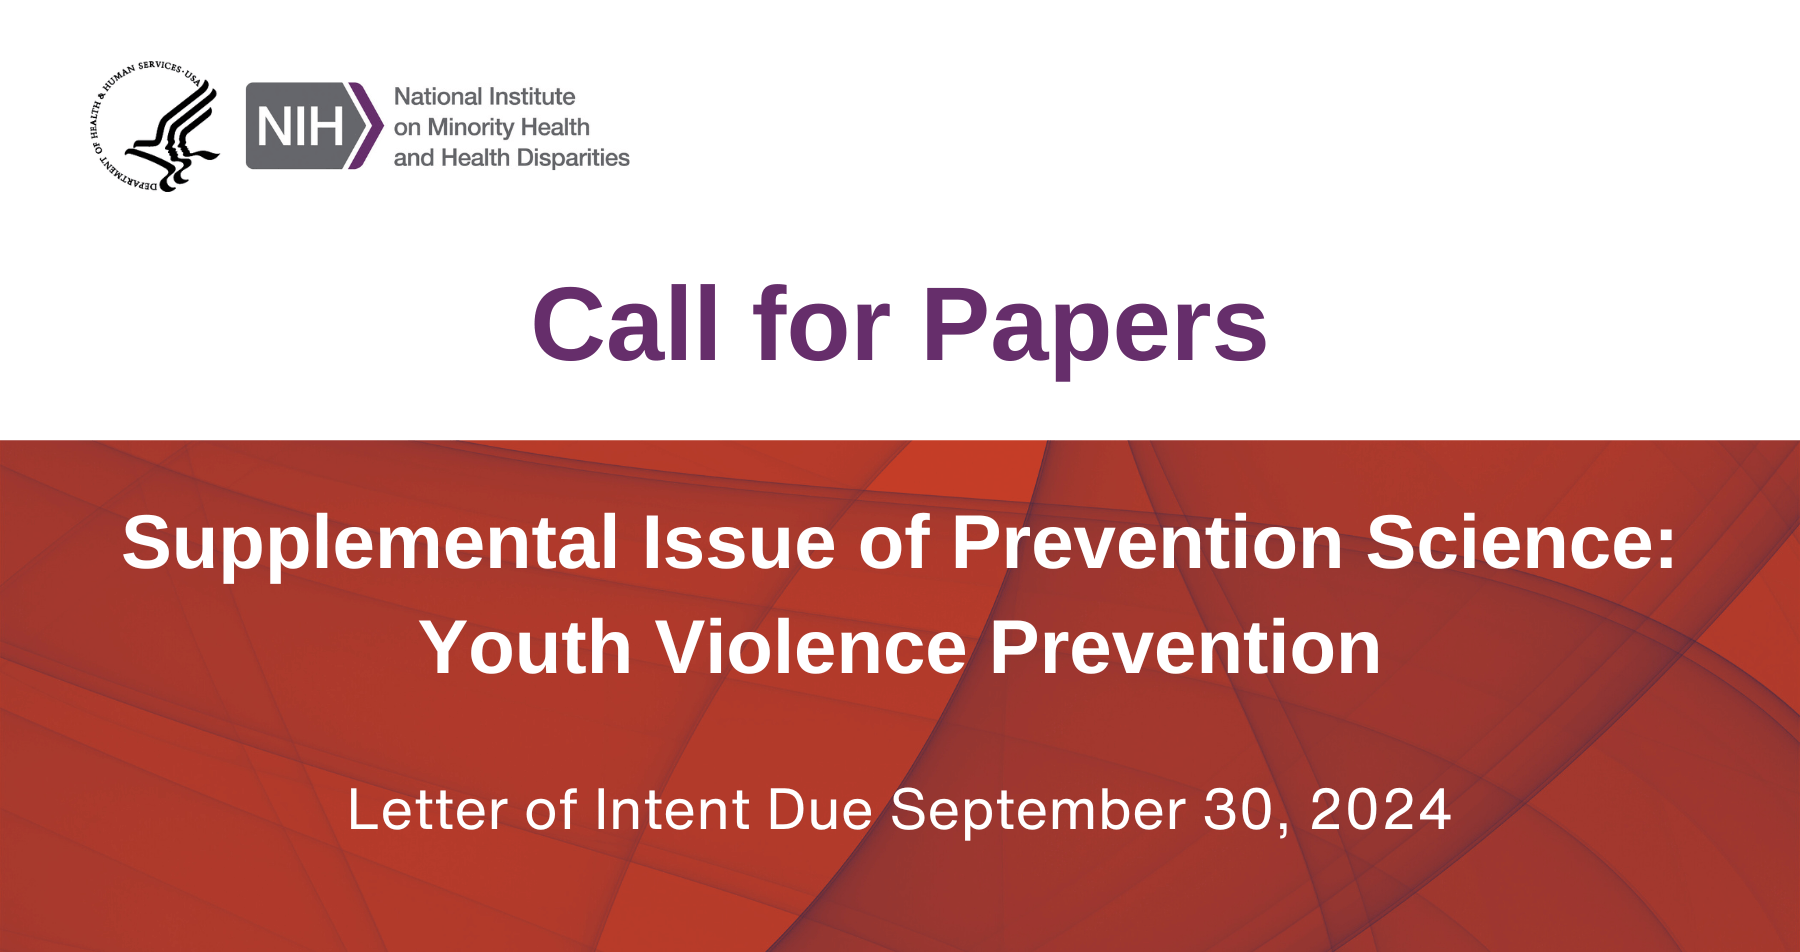 Call for Papers: Supplemental Issue of Prevention Science, Youth Violence Prevention. Letter of intent due September 30, 2024